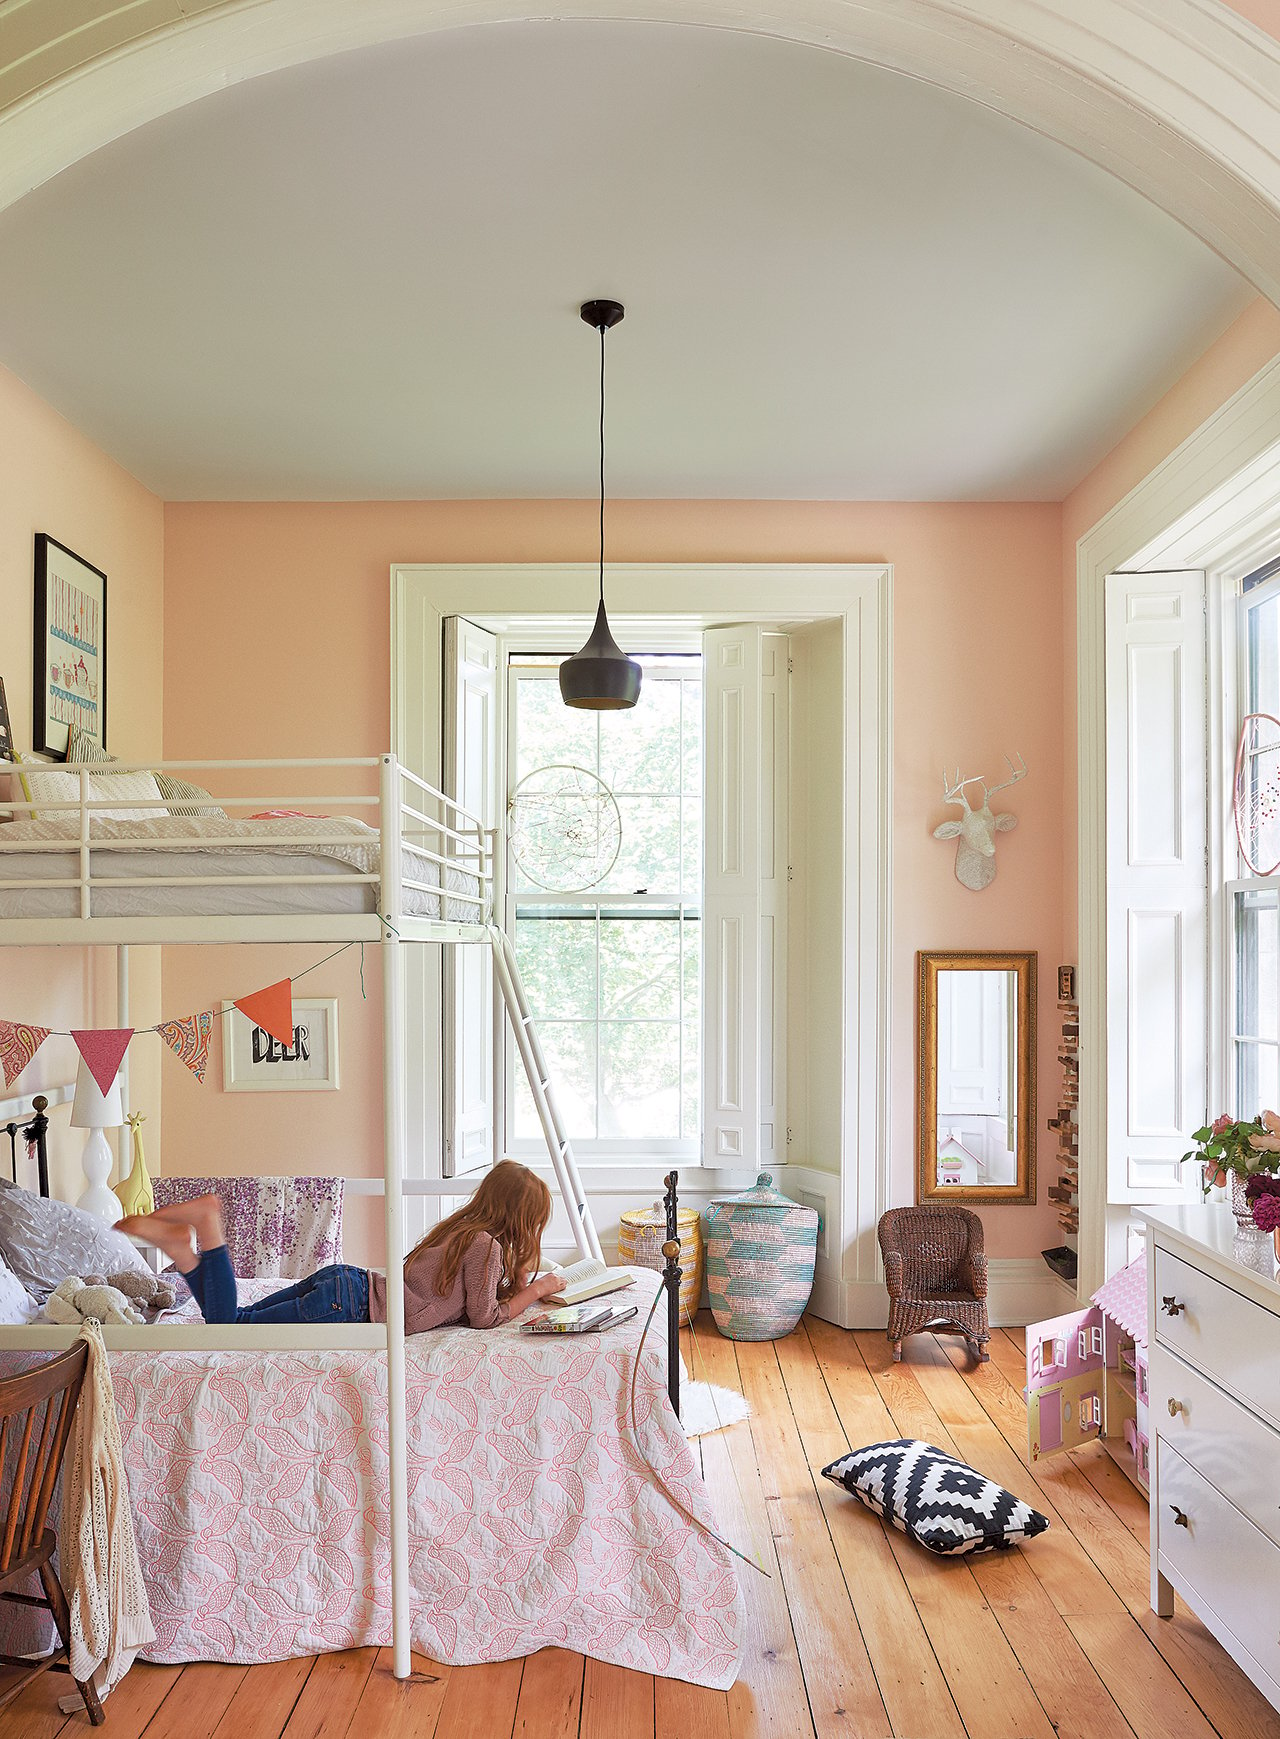 The daughter's bedroom has light neutral walls, wooden floors, big windows, and a beautiful bunk bed.